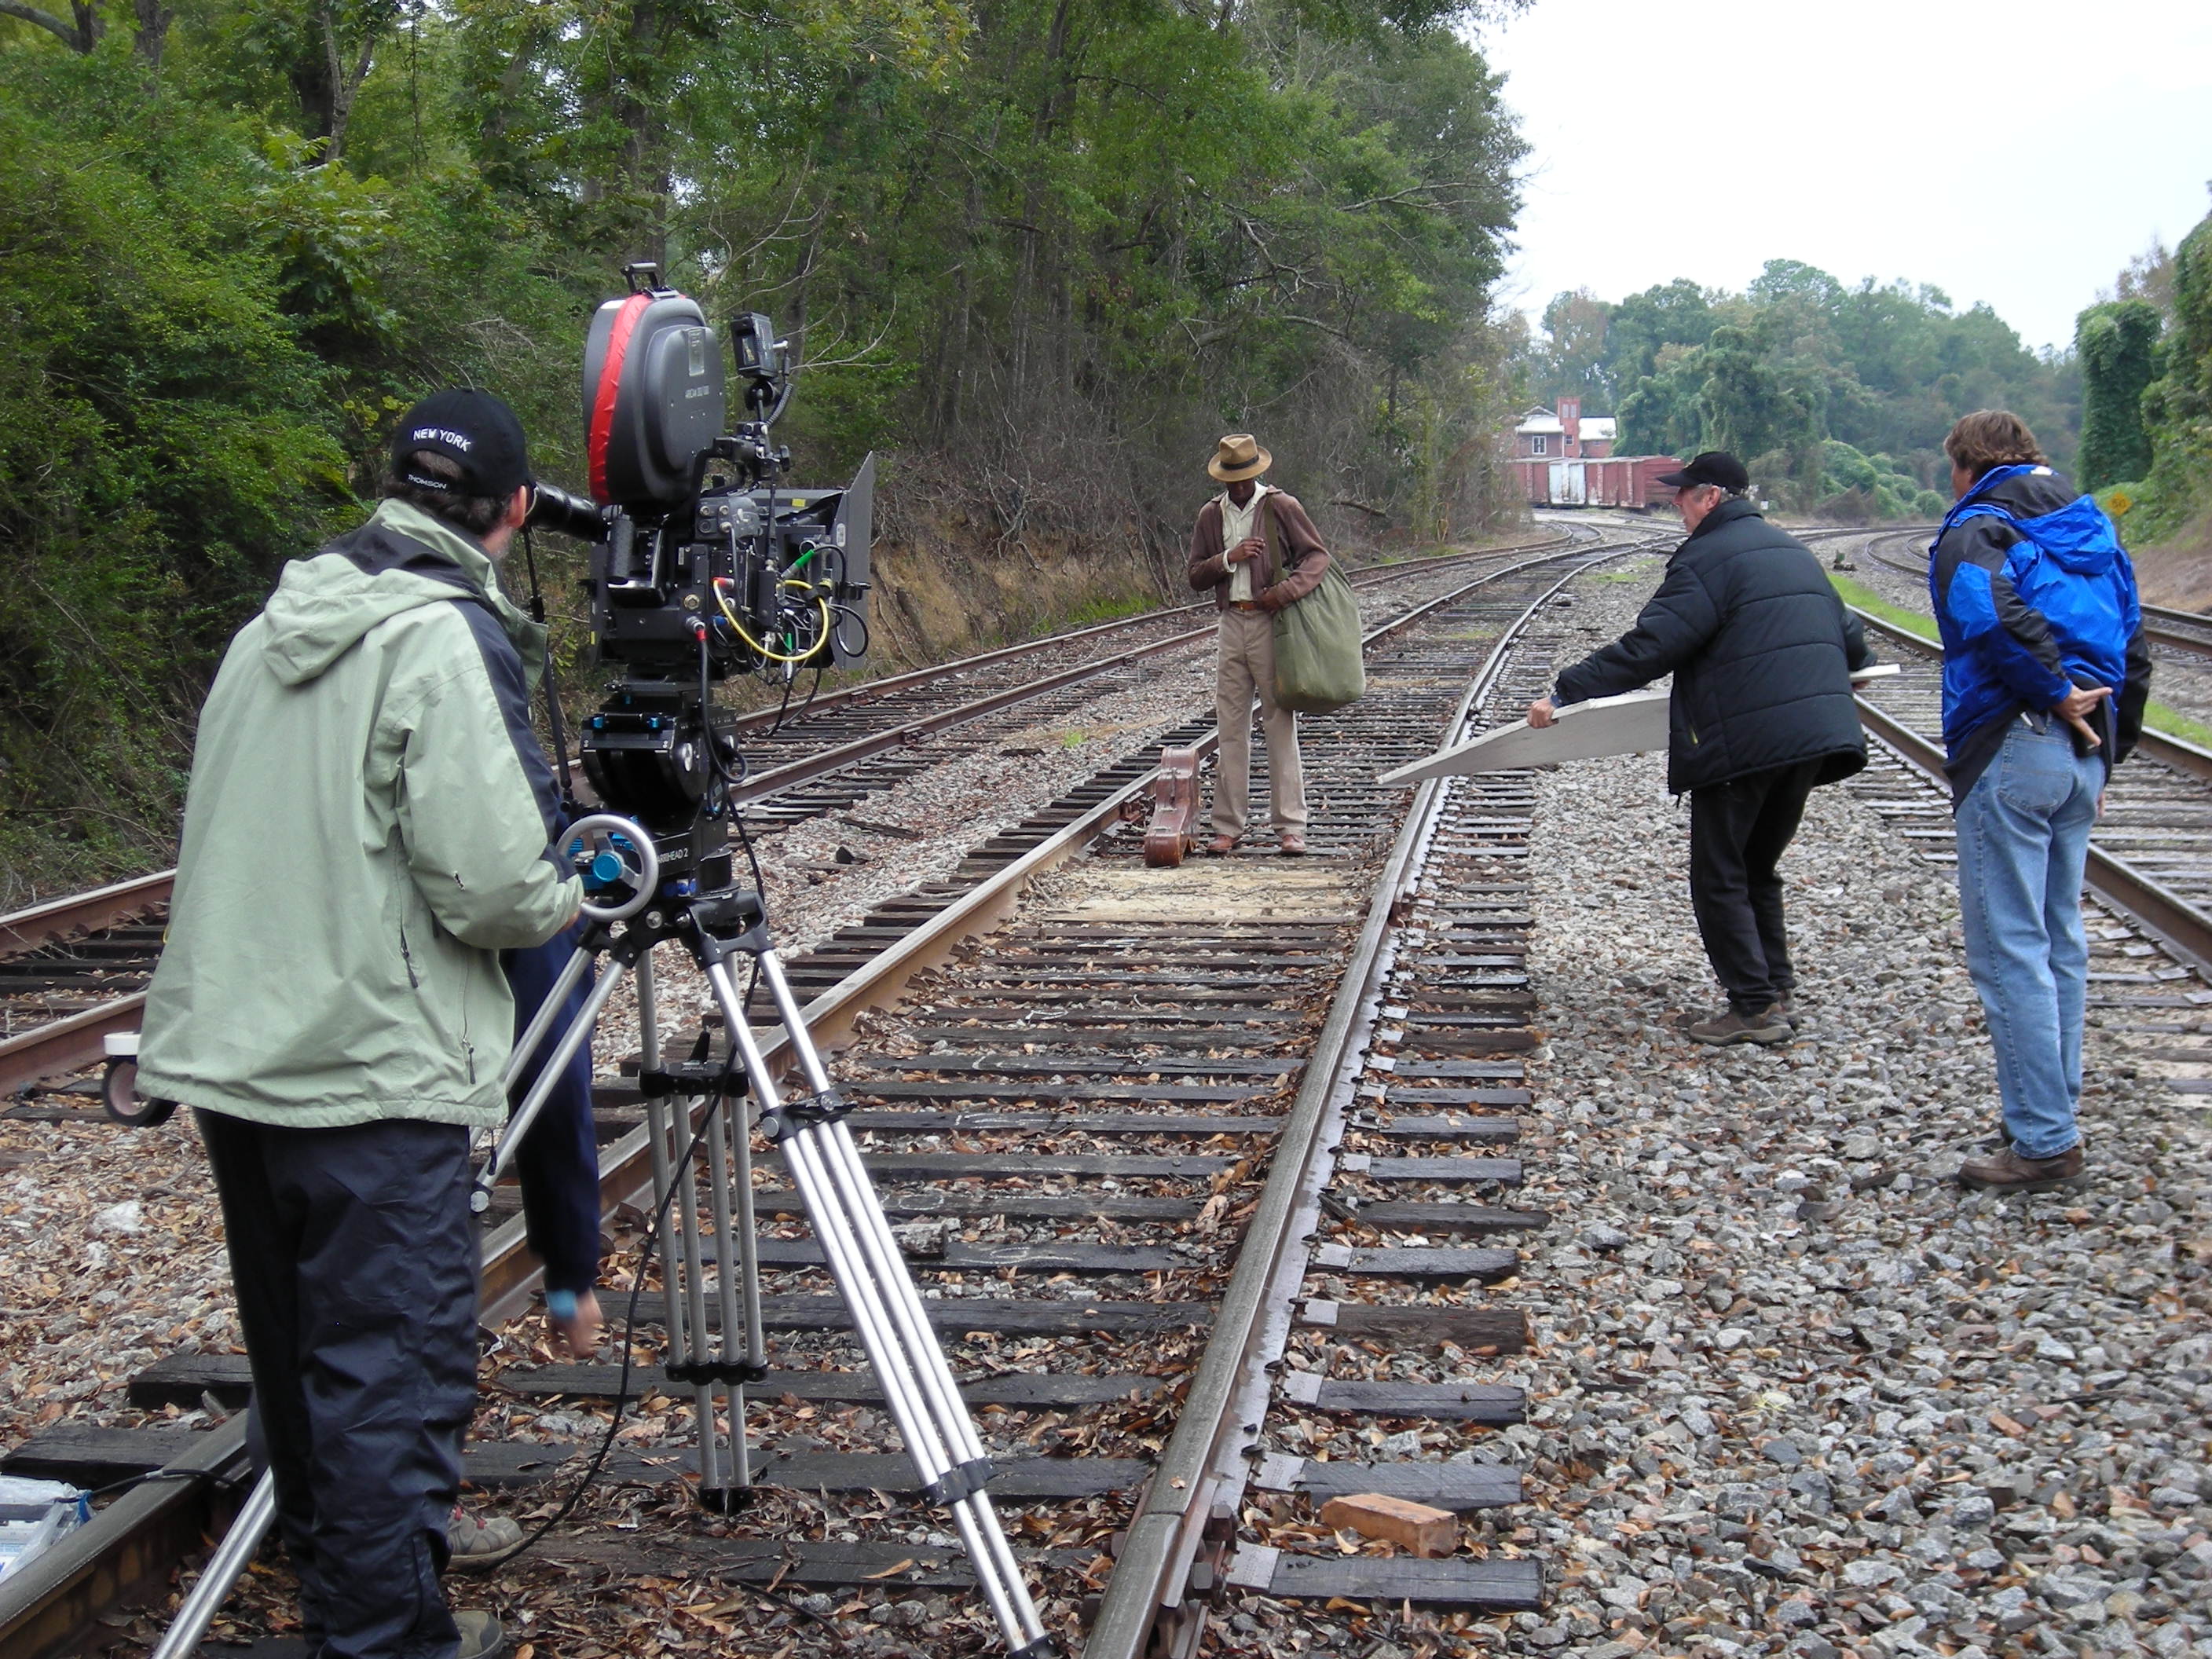 On location. Honeydripper, 2006. Working adjacent to main line railroads takes planning and attention to safety. CSX allowed Honeydripper crews to work adjacent to their Main Line as long as crews did not 